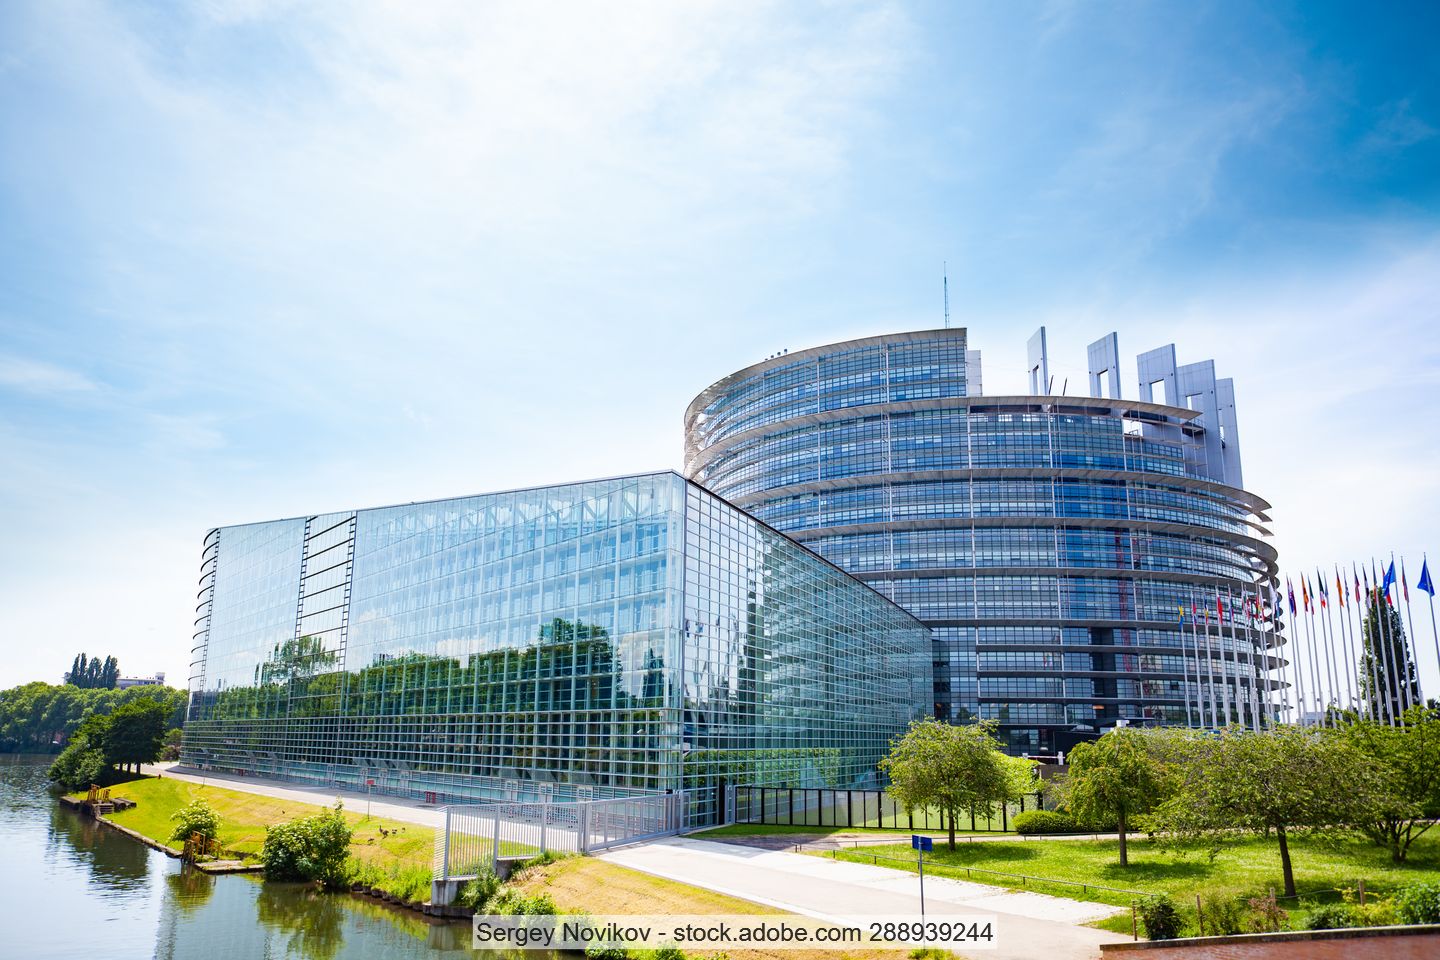 The European Parliament's building in Strasbourg, France